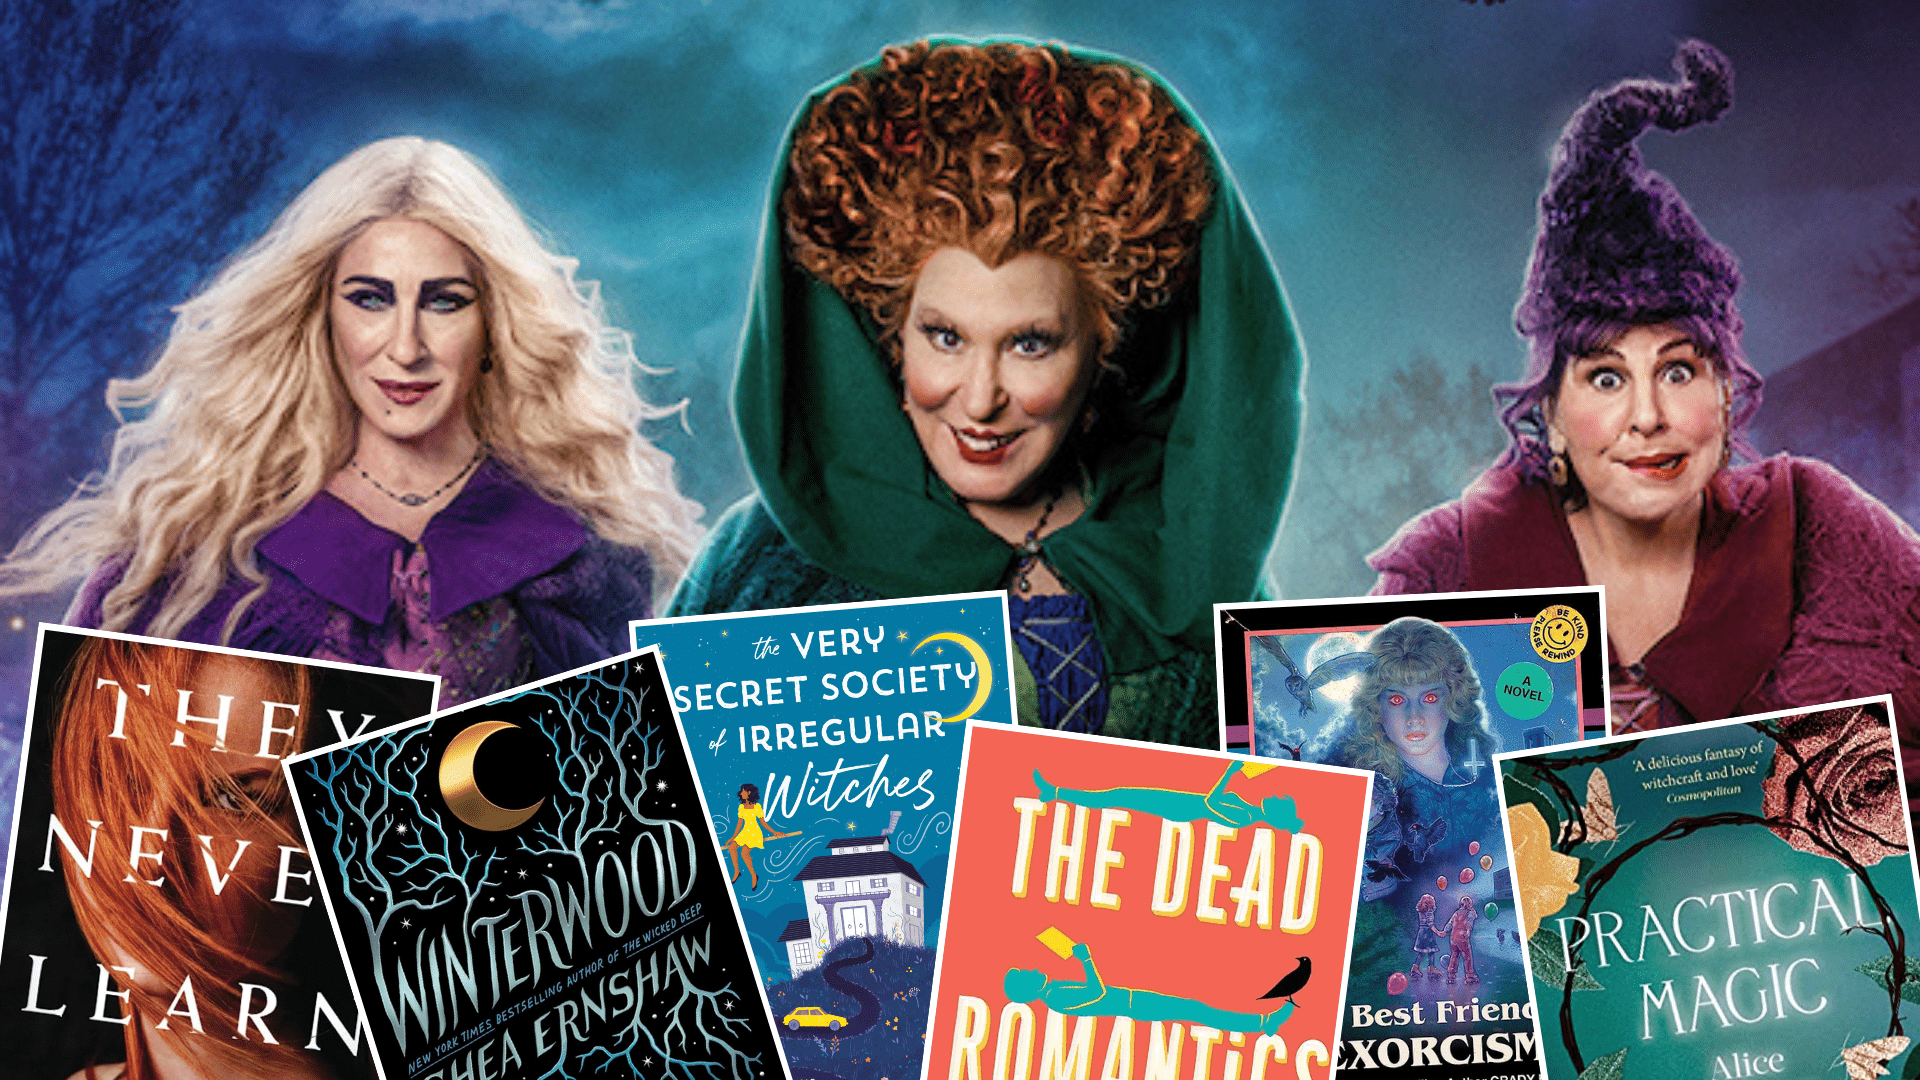 Witchy Book Recommendations - Witchy Book Recommendations For A Hocus Pocus Halloween